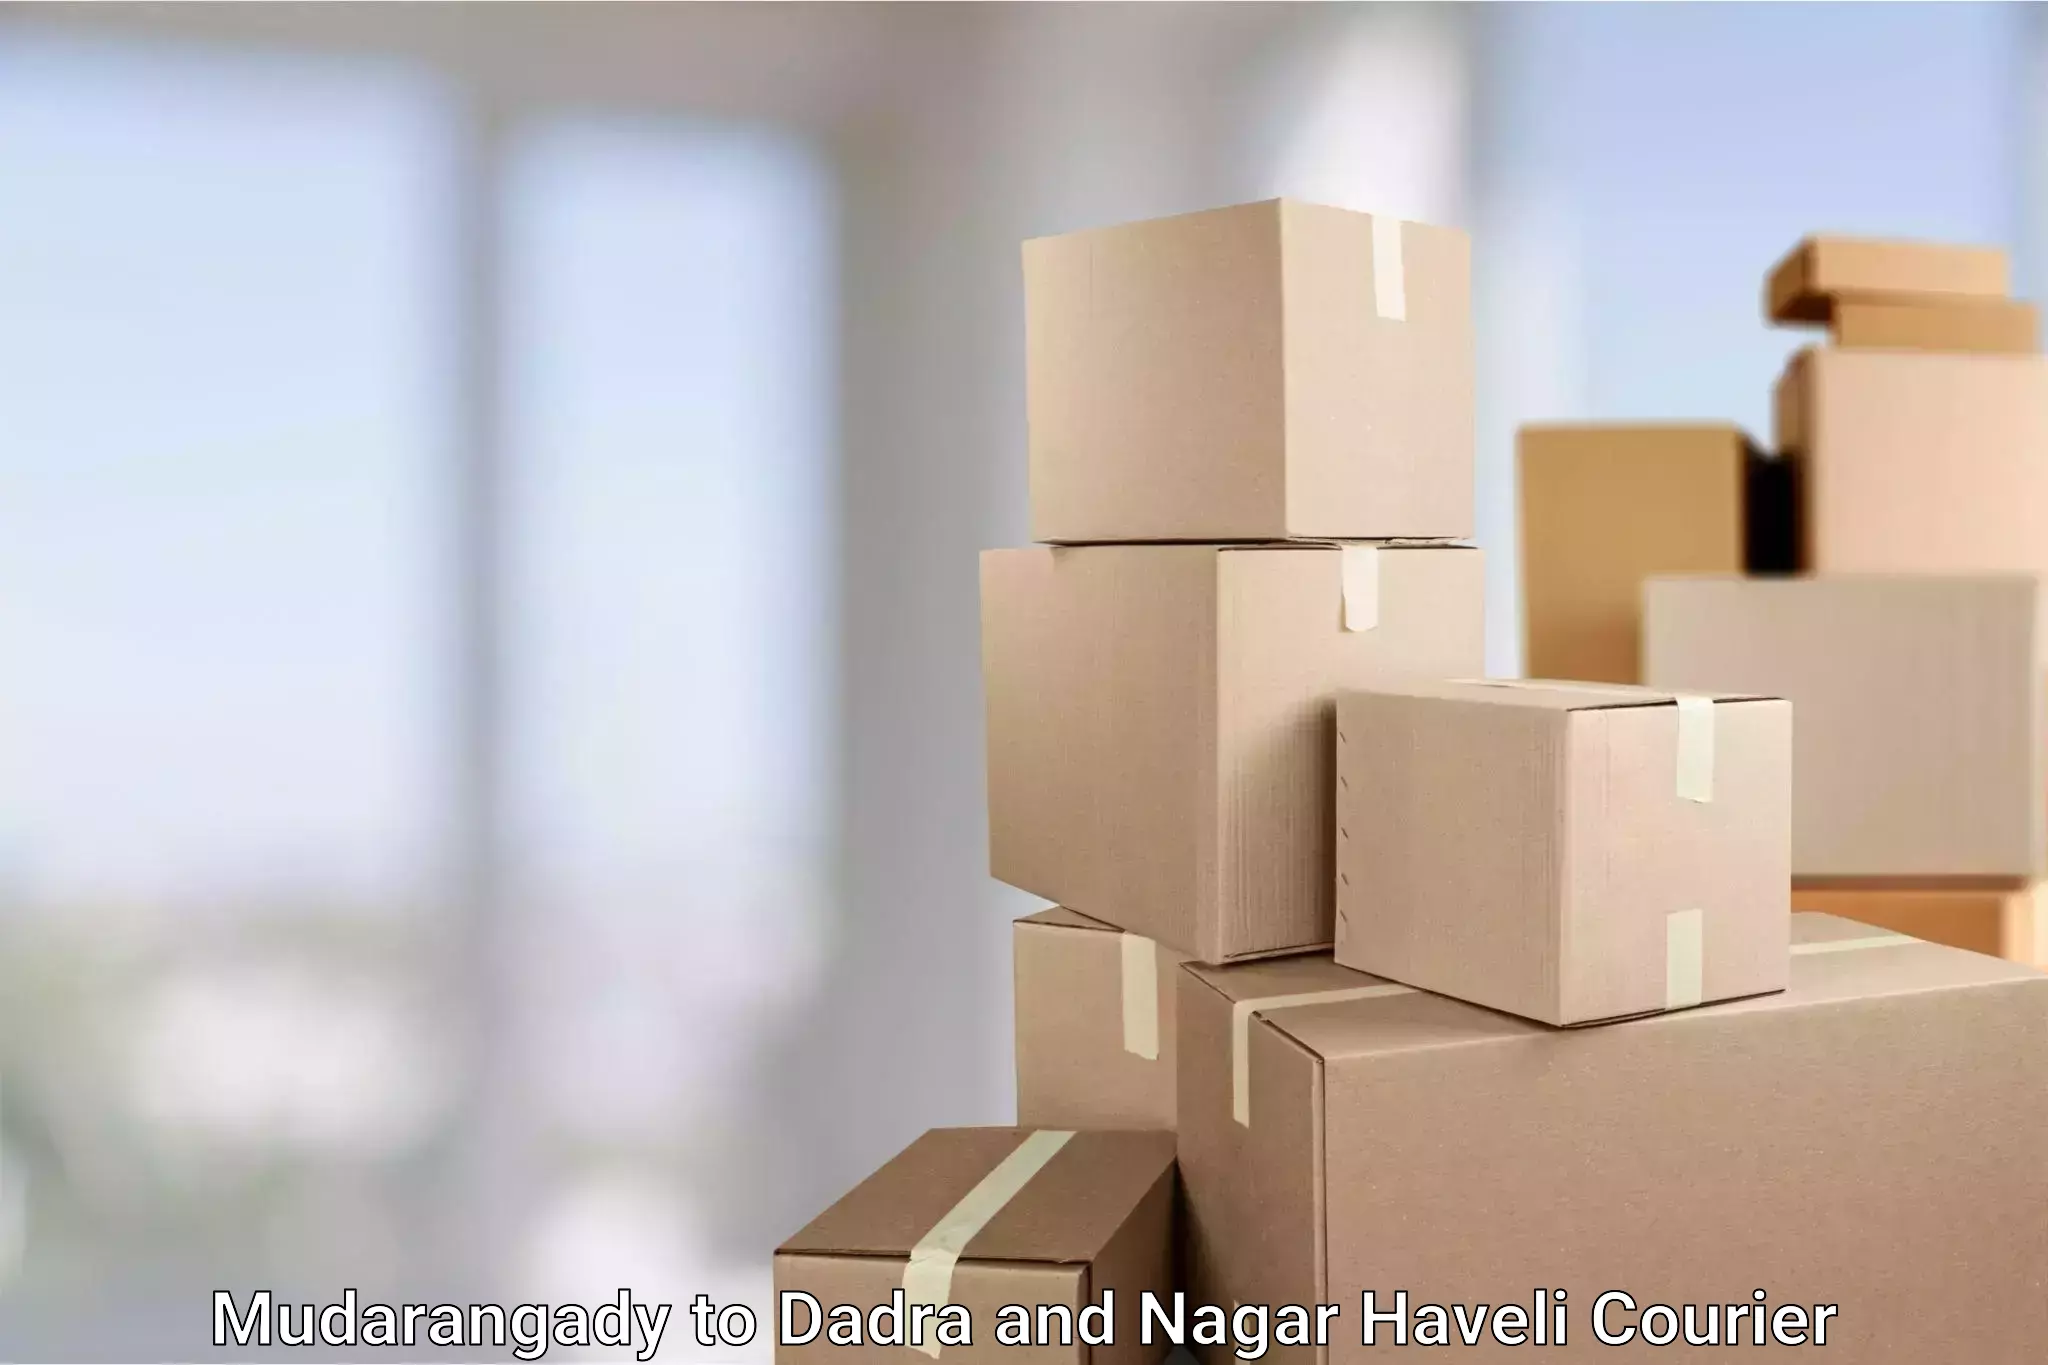 Long distance courier in Mudarangady to Dadra and Nagar Haveli